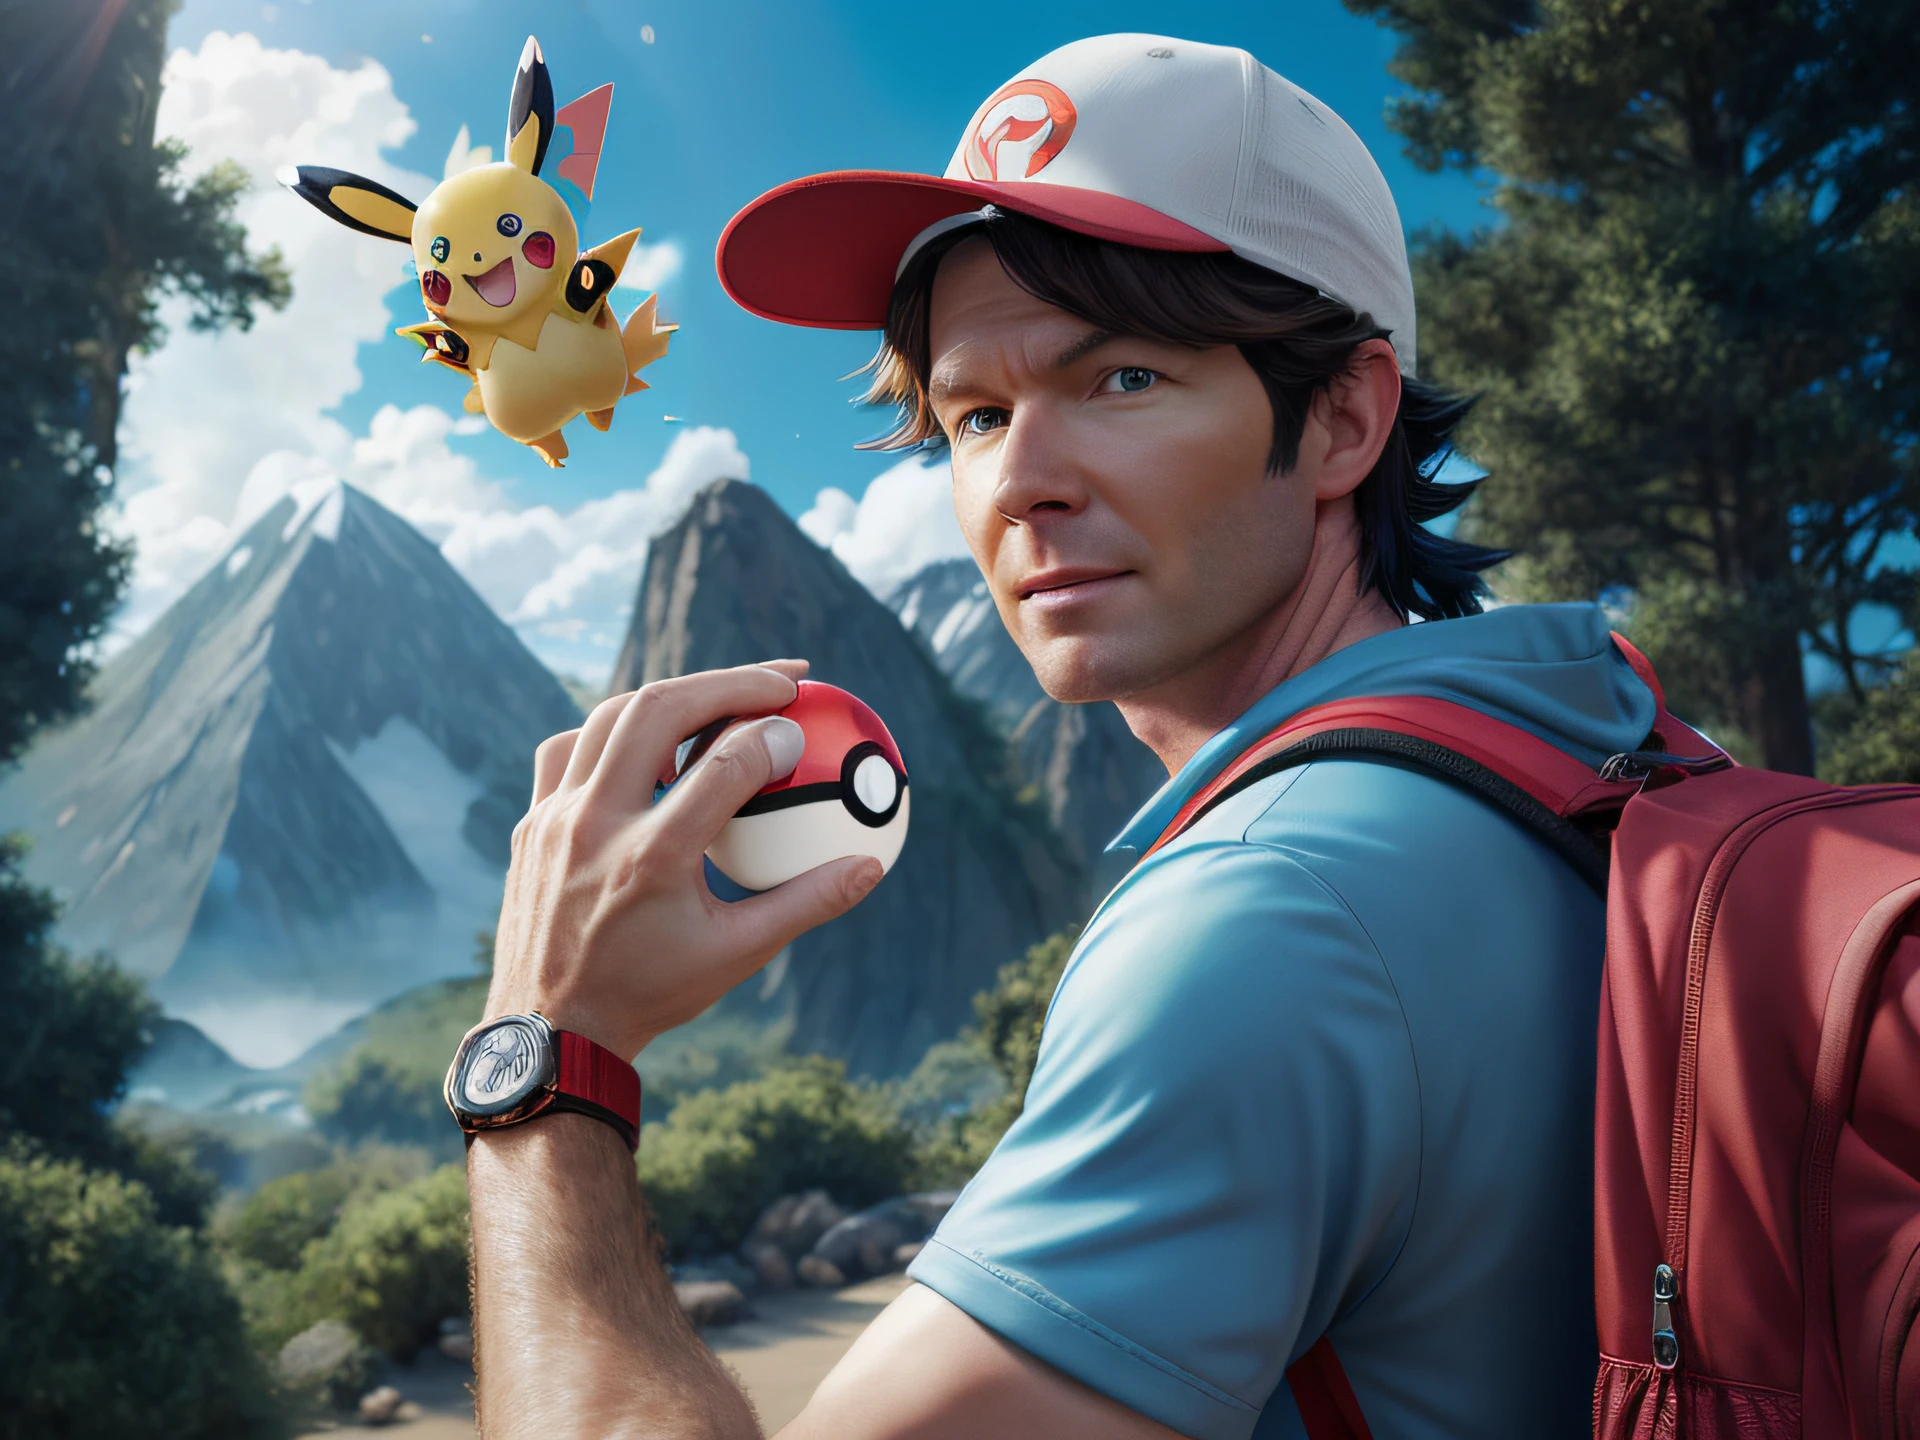 pokemon go is a popular video game that is being played by many people, pokemon trainer, pokemon in the wild, illustration pokemon, key art, promotional art, ash ketchum, pokémon, pokemon, pokemon cap, official art, a hyper realistic, adventure hyper realistic render, new pokemon, official artwork, misty, john park, fan art, pokemon inspired, detective pikachu